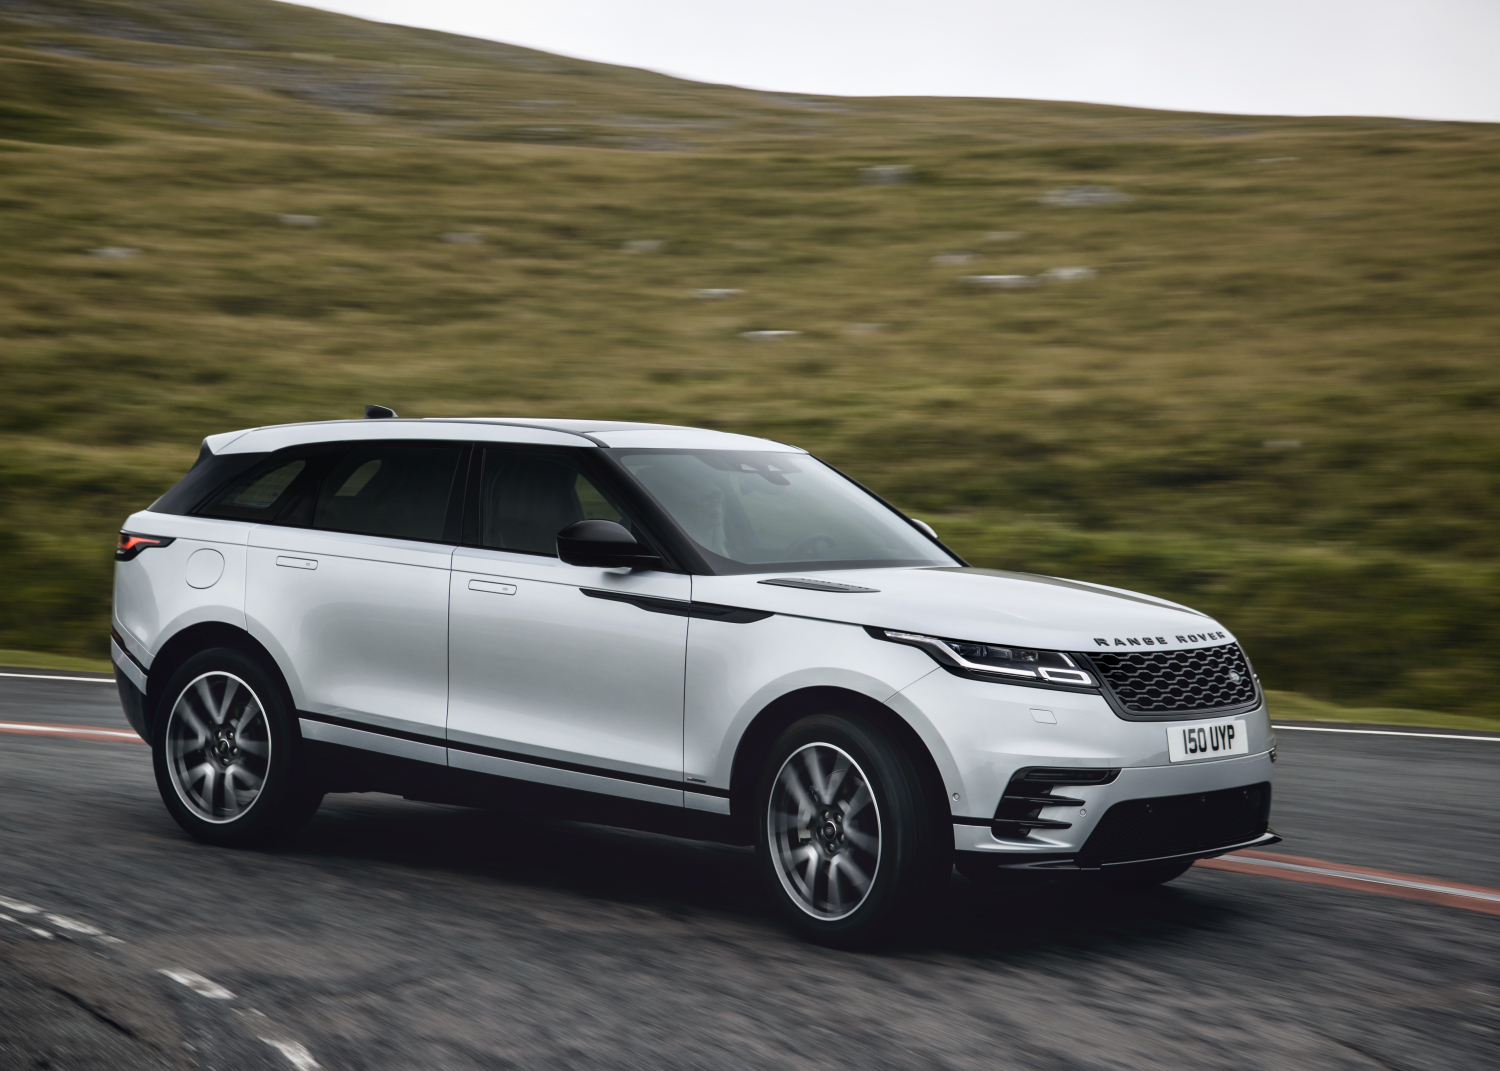 RANGE ROVER VELAR ELECTRIFIES WITH PLUG-IN HYBRID AND STATE-OF-THE-ART  INFOTAINMENT | Land Rover Media Newsroom